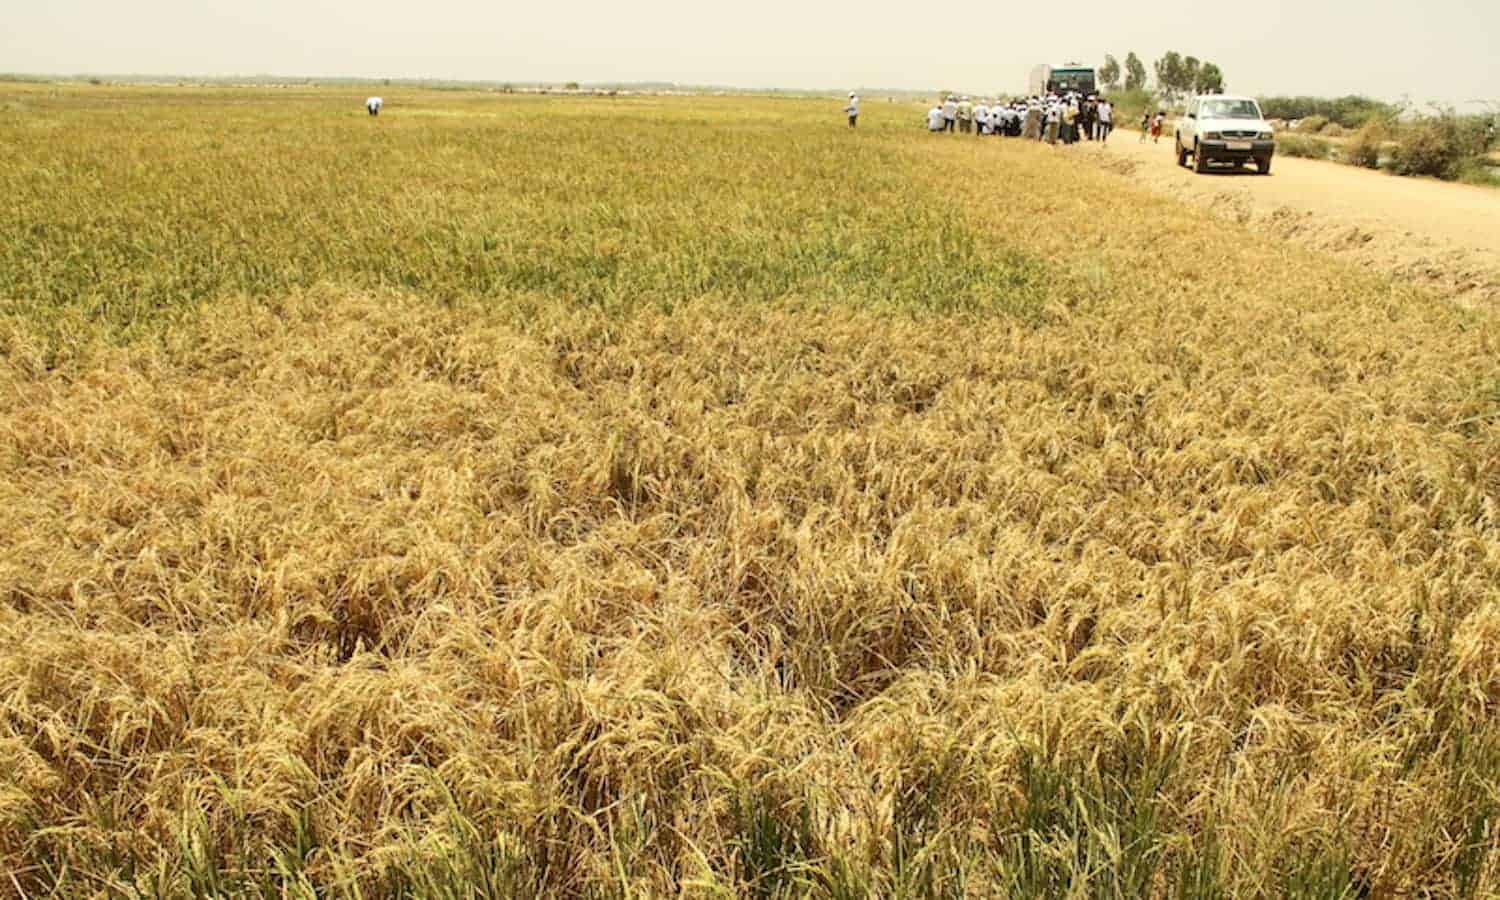 With regional recognition, CERAAS in Senegal plans to expand its efforts to adapt dry cereals to drought conditions throughout West and Central Africa.